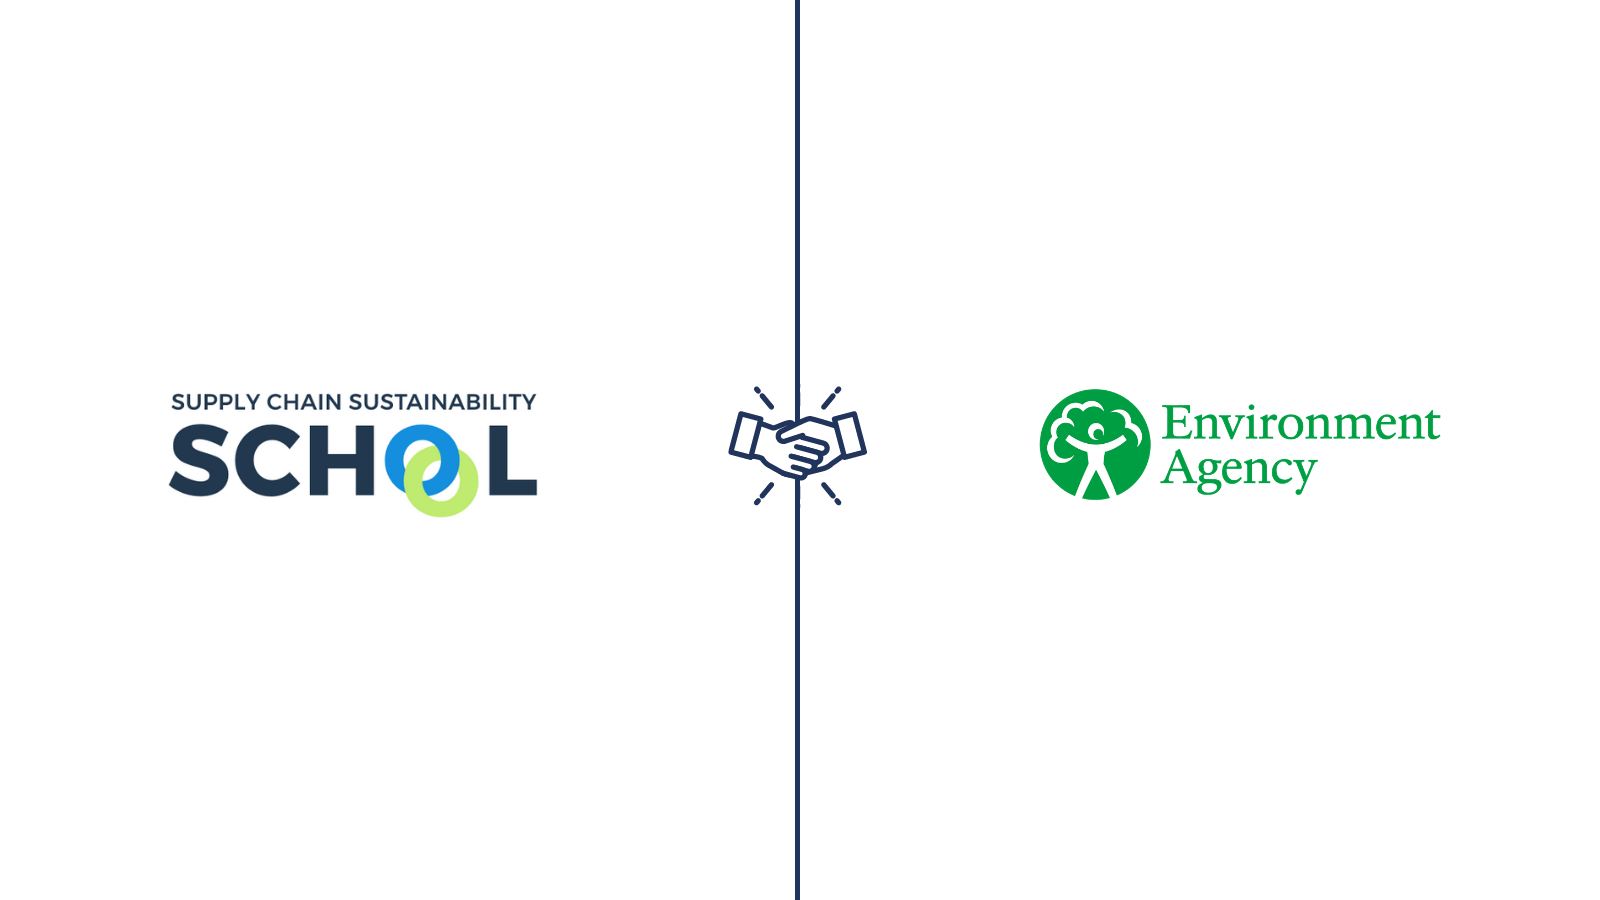 Environment Agency announced as Partner of the Supply Chain Sustainability School